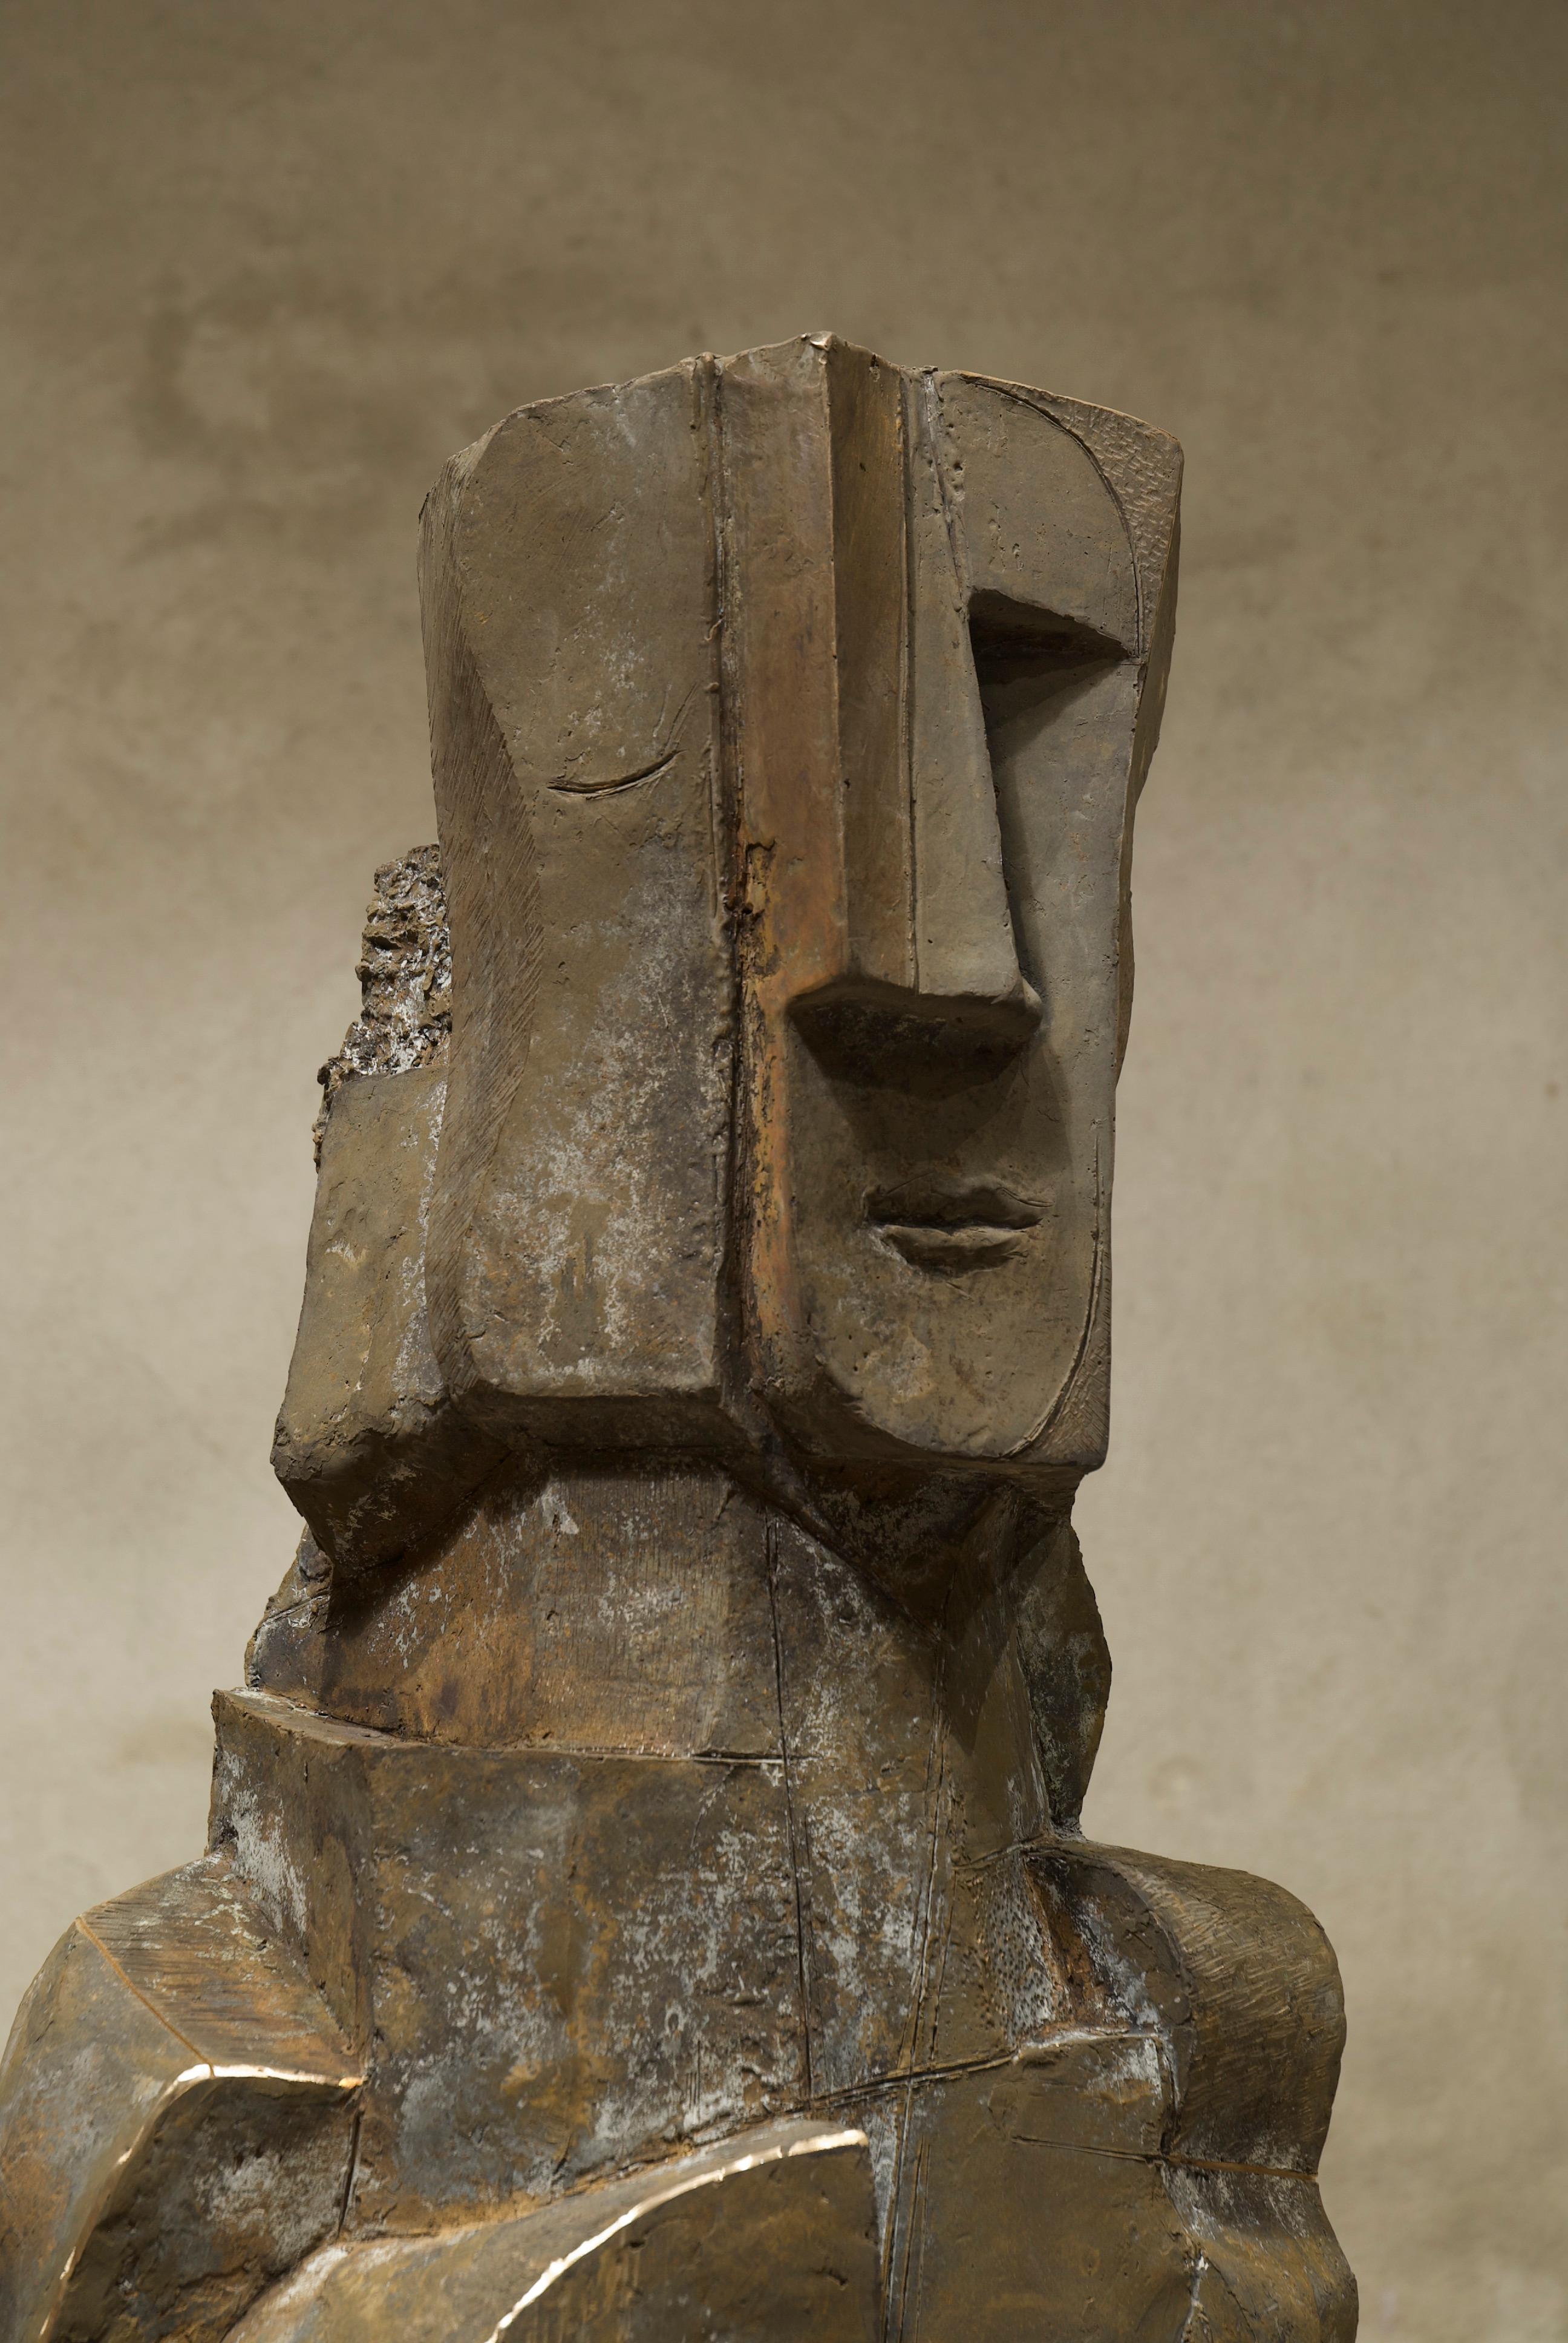 Sun Set Big Bronze Sculpture Geometric Abstract Figurative Head In Stock
Sun set ia a big bronze geometric, abstract, figurative sculpture of a head, 

Junghans (1956, Recklinghausen) creates abstract sculptures in stone, wood and bronze, mostly